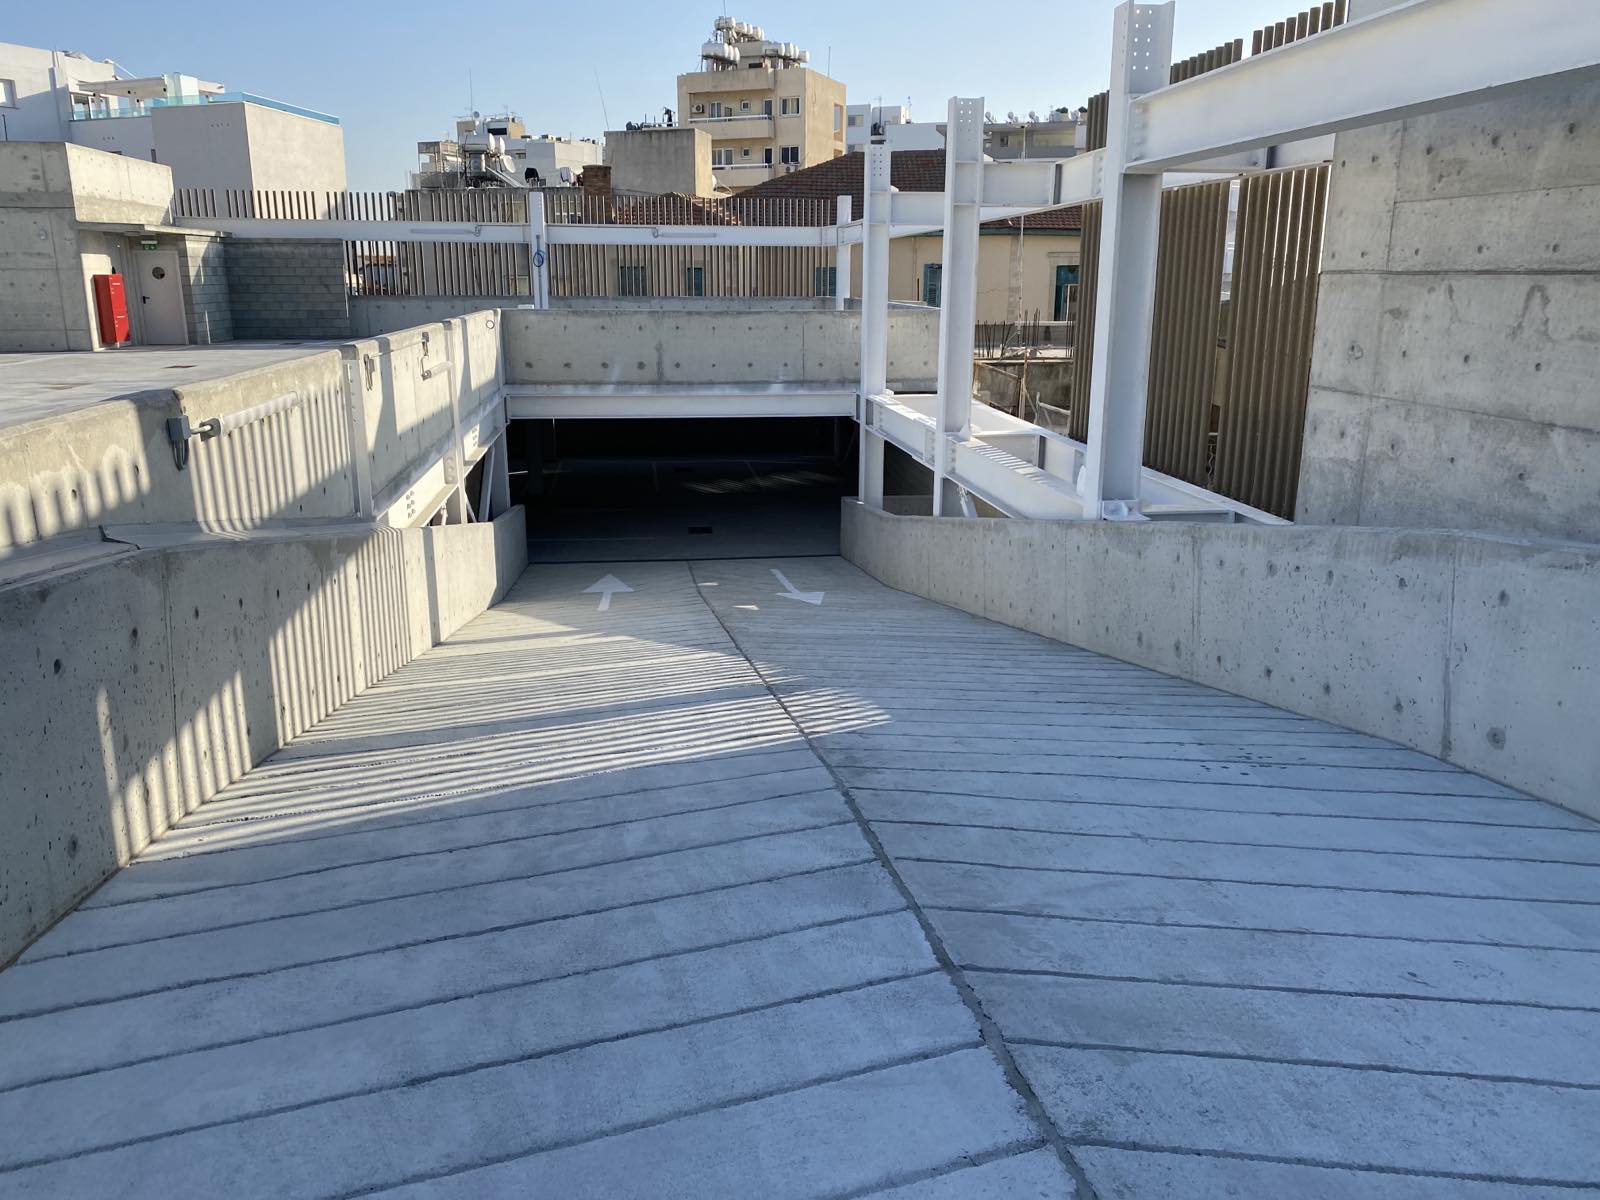 image Long-overdue new parking in Larnaca ‘ready in three months’